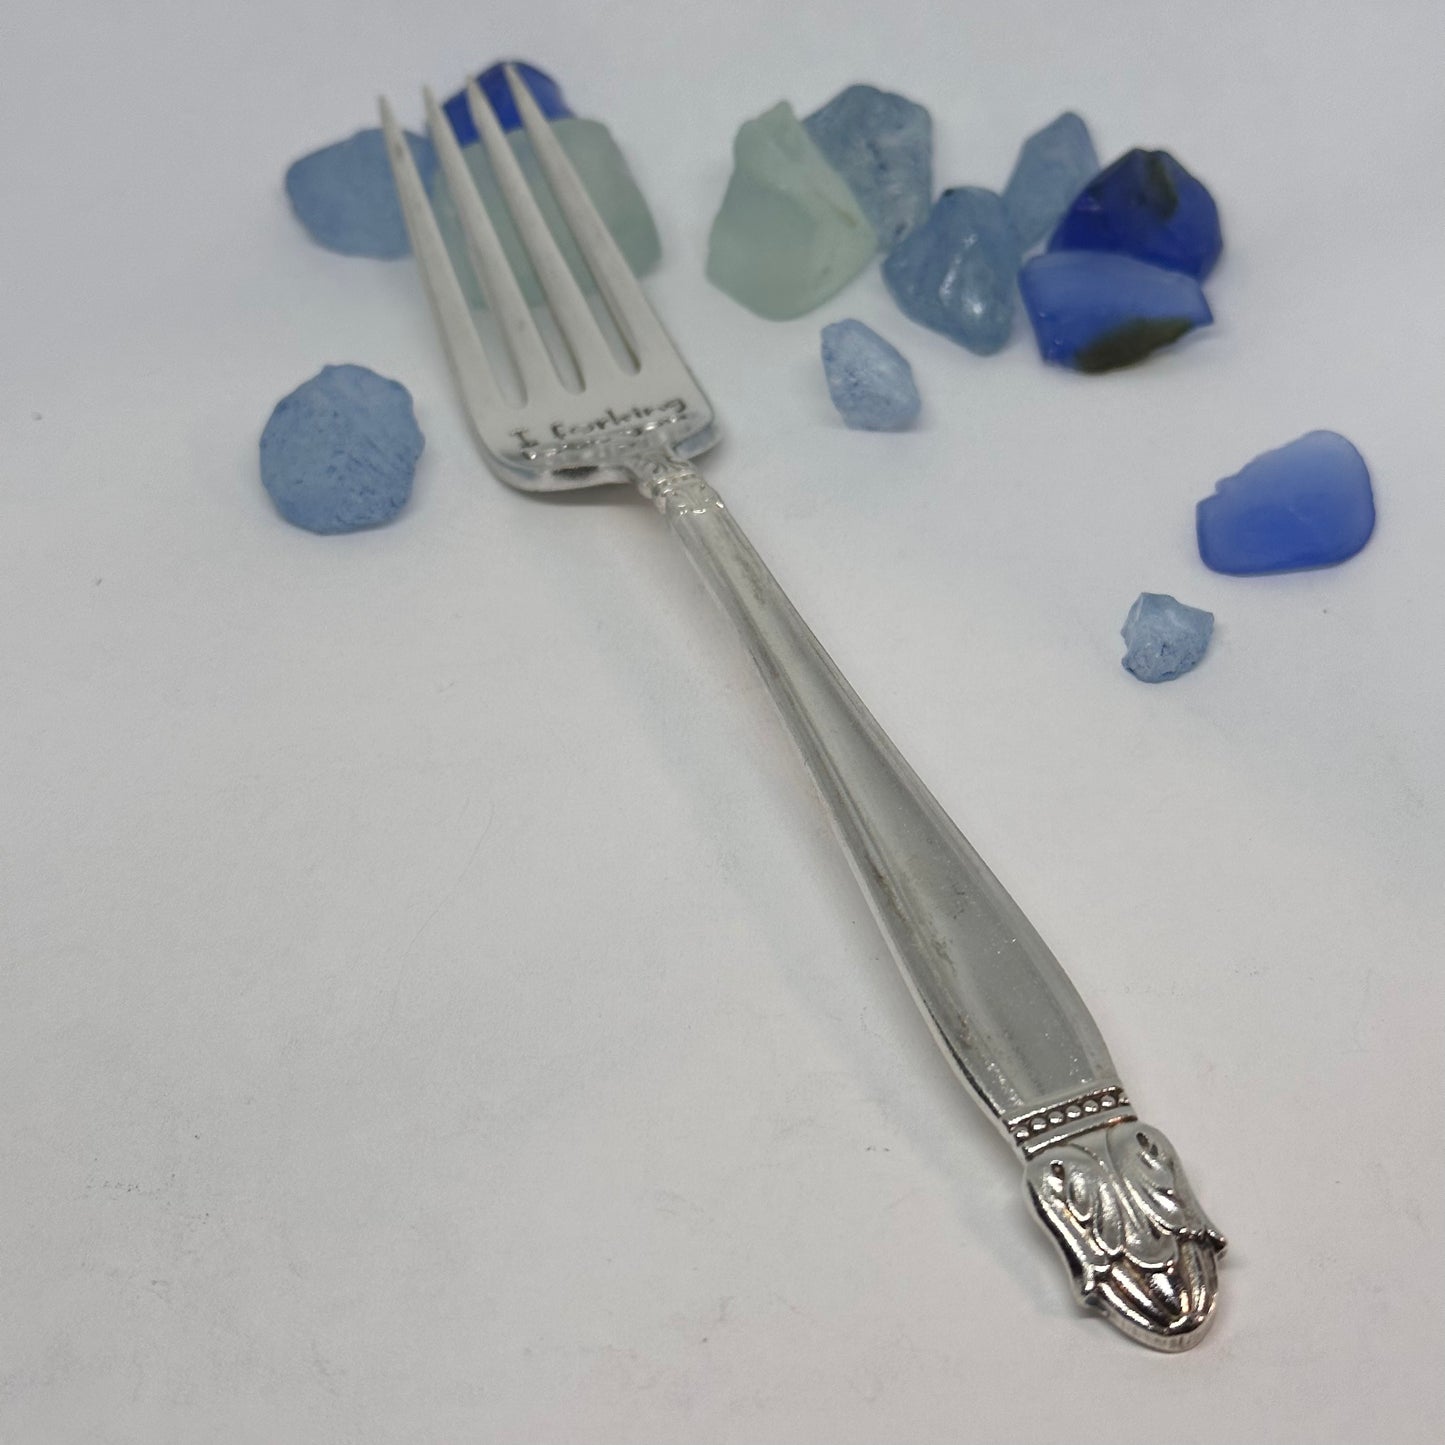 I forking love you - Vintage Silver Plated Hand Stamped Fork | Novelty | Gift for Husband Wife Boyfriend Girlfriend